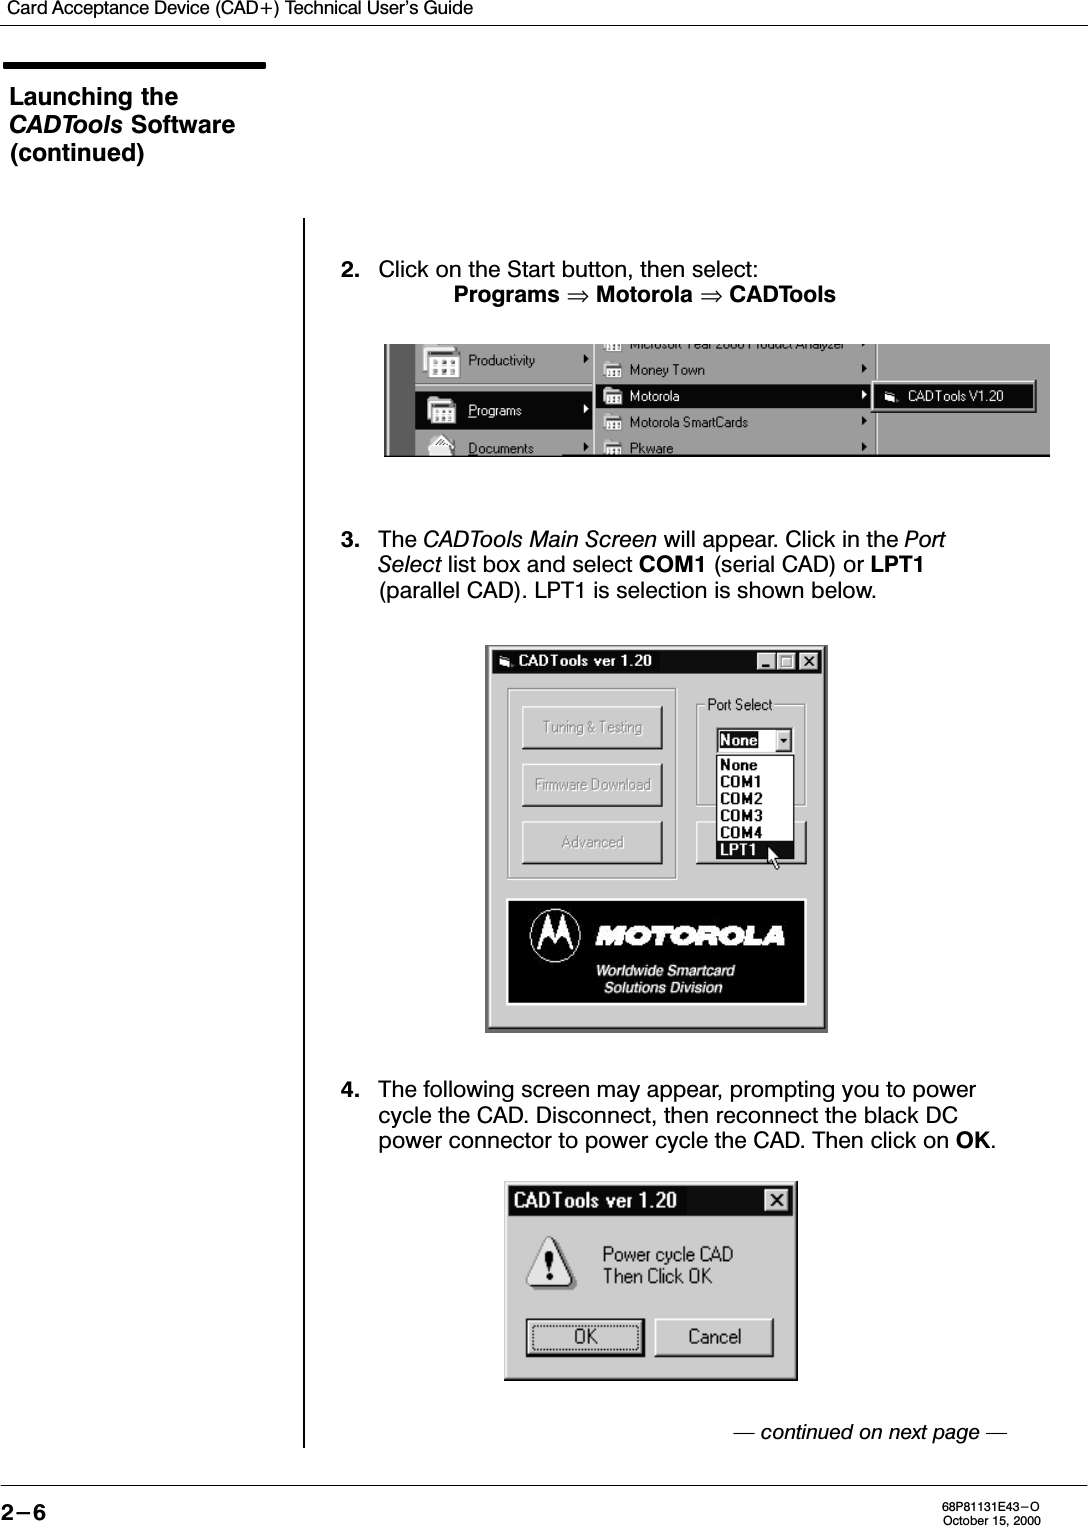 Card Acceptance Device (CAD+) Technical User&apos;s Guide2-6 68P81131E43-OOctober 15, 2000Launching theCADTools Software(continued)2. Click on the Start button, then select:Programs ⇒ Motorola ⇒ CADTools3. The CADTools Main Screen will appear. Click in the PortSelect list box and select COM1 (serial CAD) or LPT1(parallel CAD). LPT1 is selection is shown below.4. The following screen may appear, prompting you to powercycle the CAD. Disconnect, then reconnect the black DCpower connector to power cycle the CAD. Then click on OK. continued on next page 